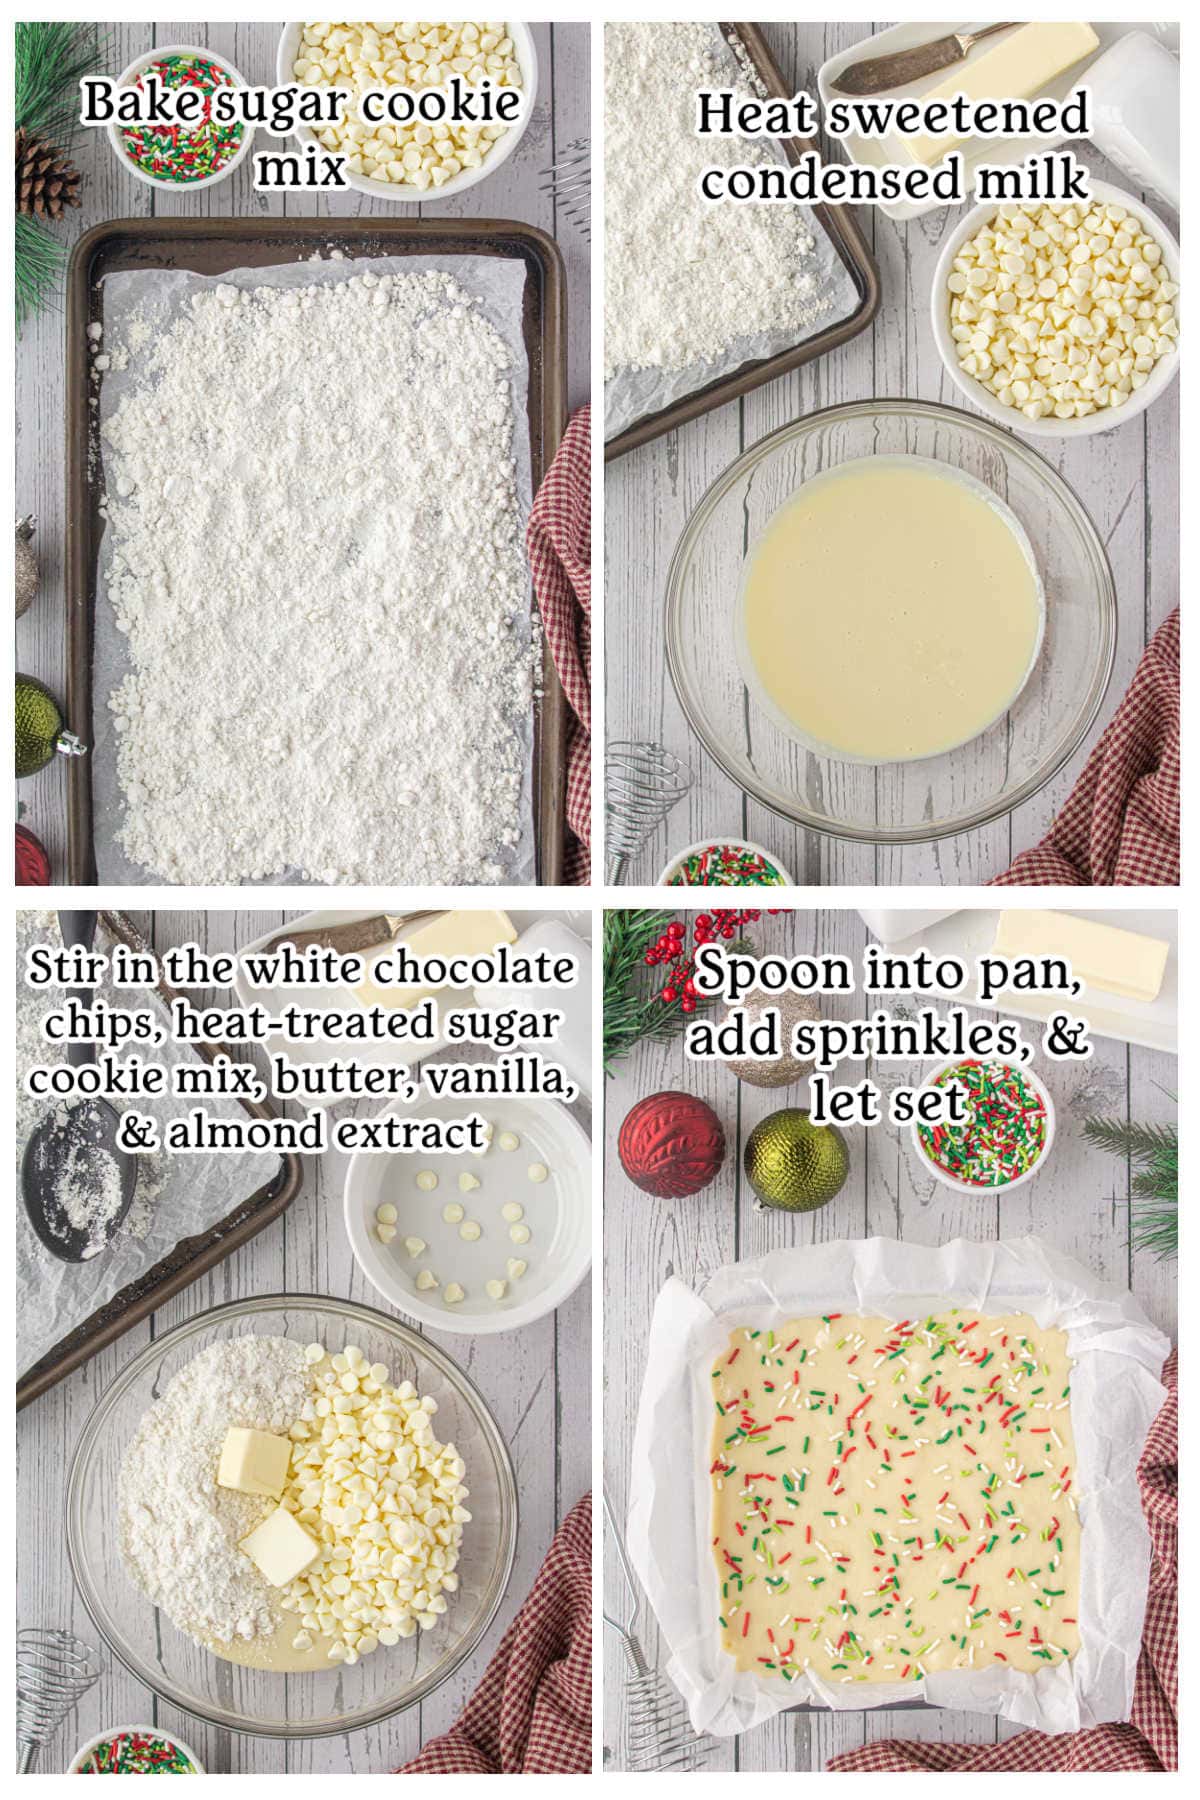 Four overhead images with text overlay depicting various steps to prepare and make the Christmas cookie fudge.